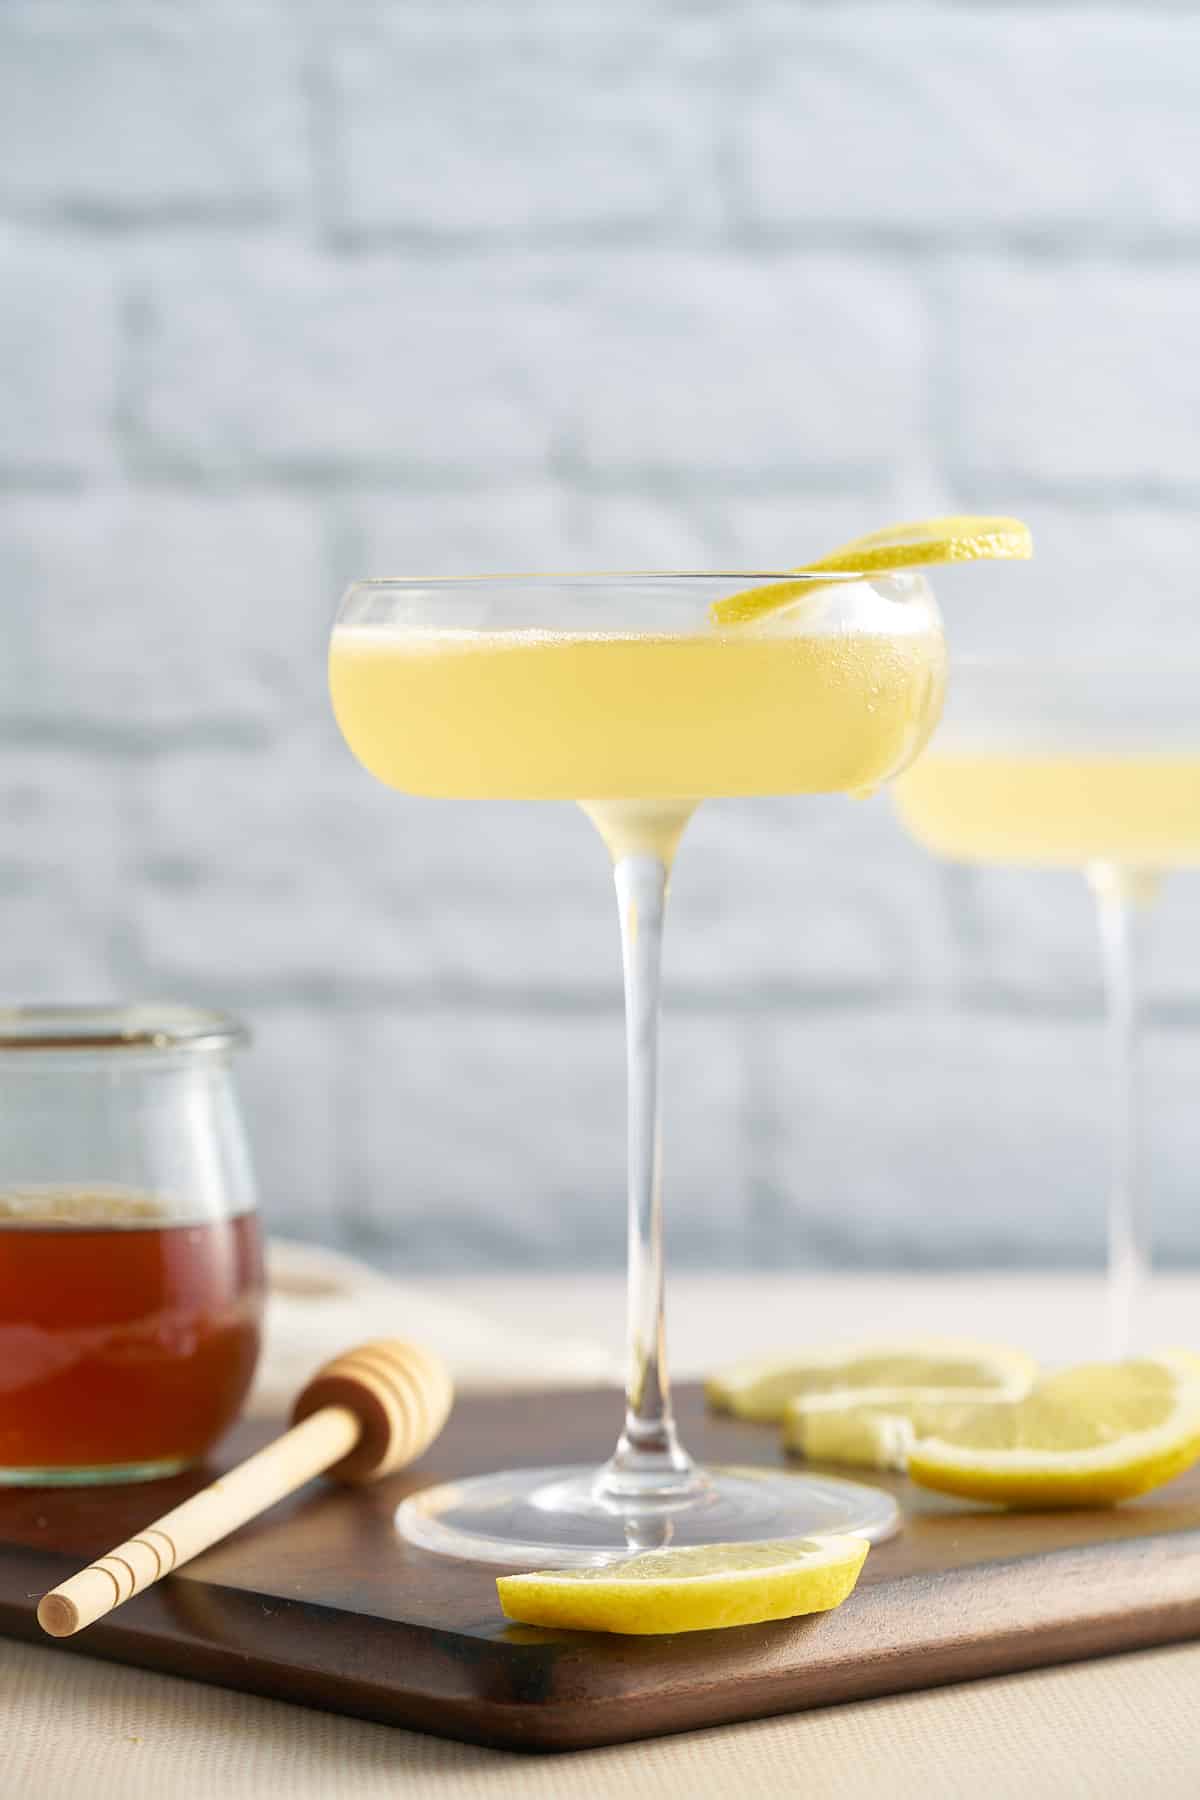 the cocktail in a glass with honey syrup next to it